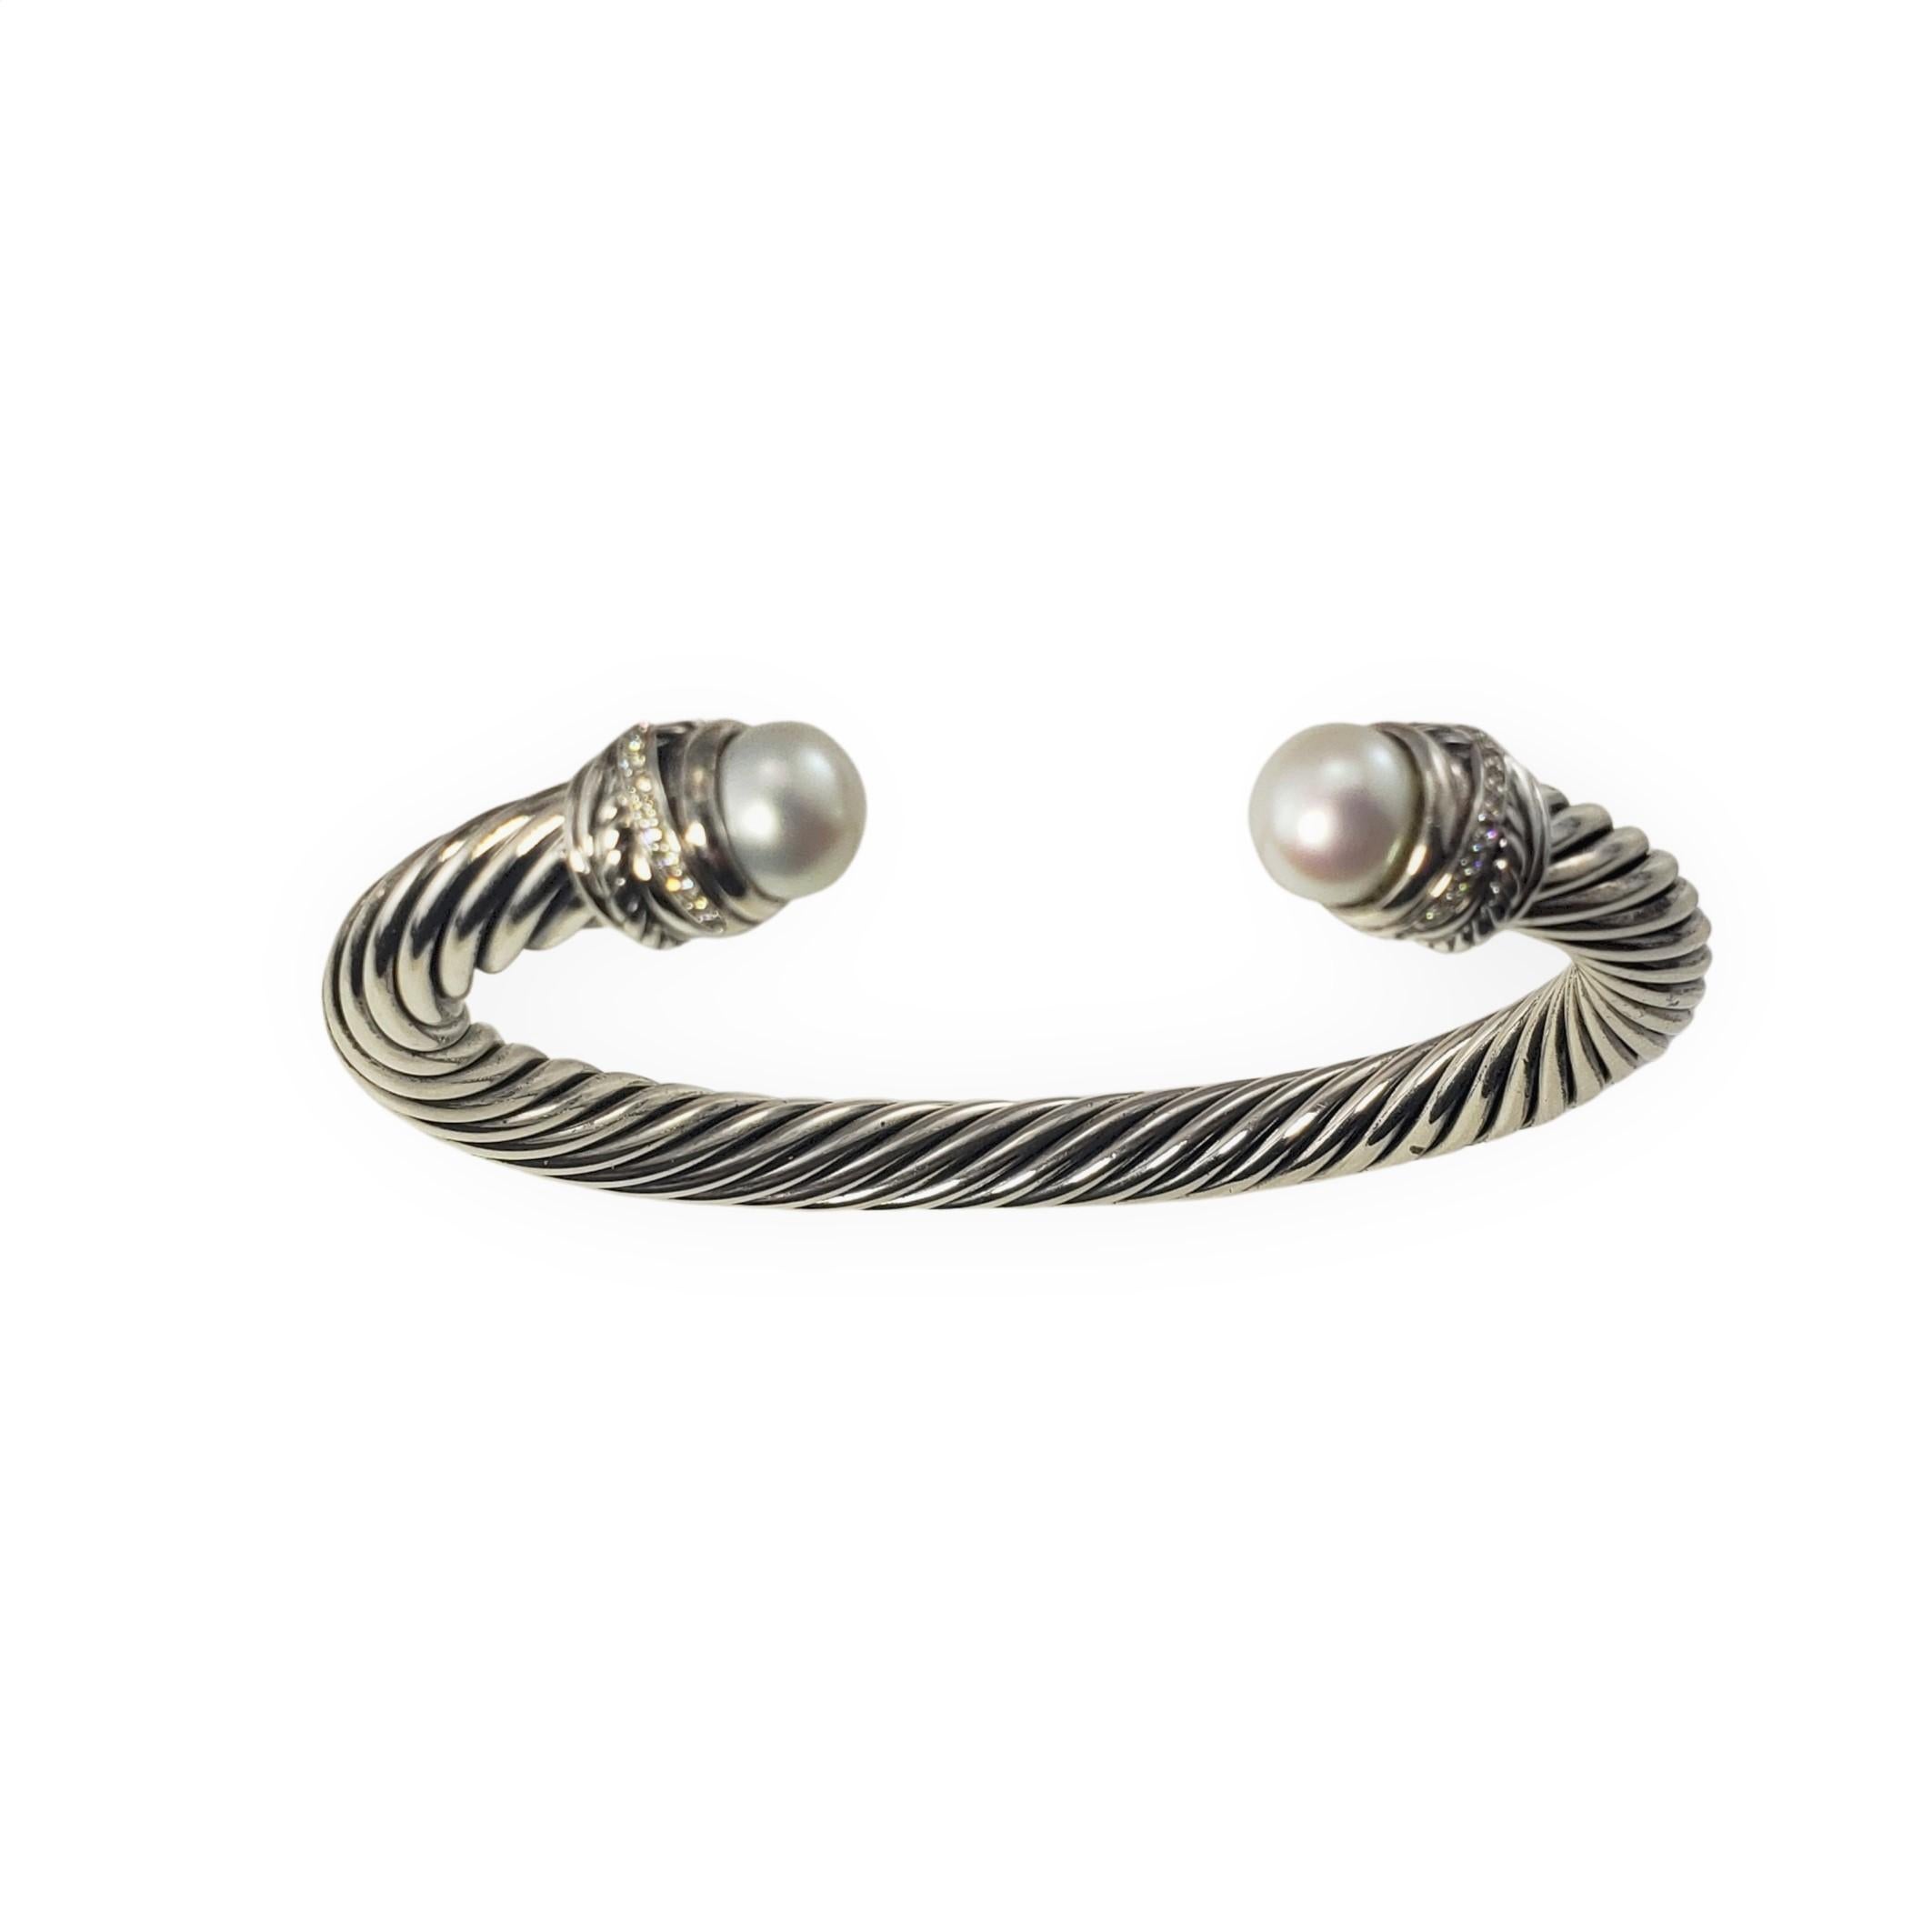 David Yurman Sterling Silver Pearl and Diamond Cuff Bracelet-

This lovely cuff bracelet by David Yurman is accented with two white pearls (8 mm each) and 26 round brilliant cut diamonds set in classic sterling silver.  Width:  7 mm.

Approximate